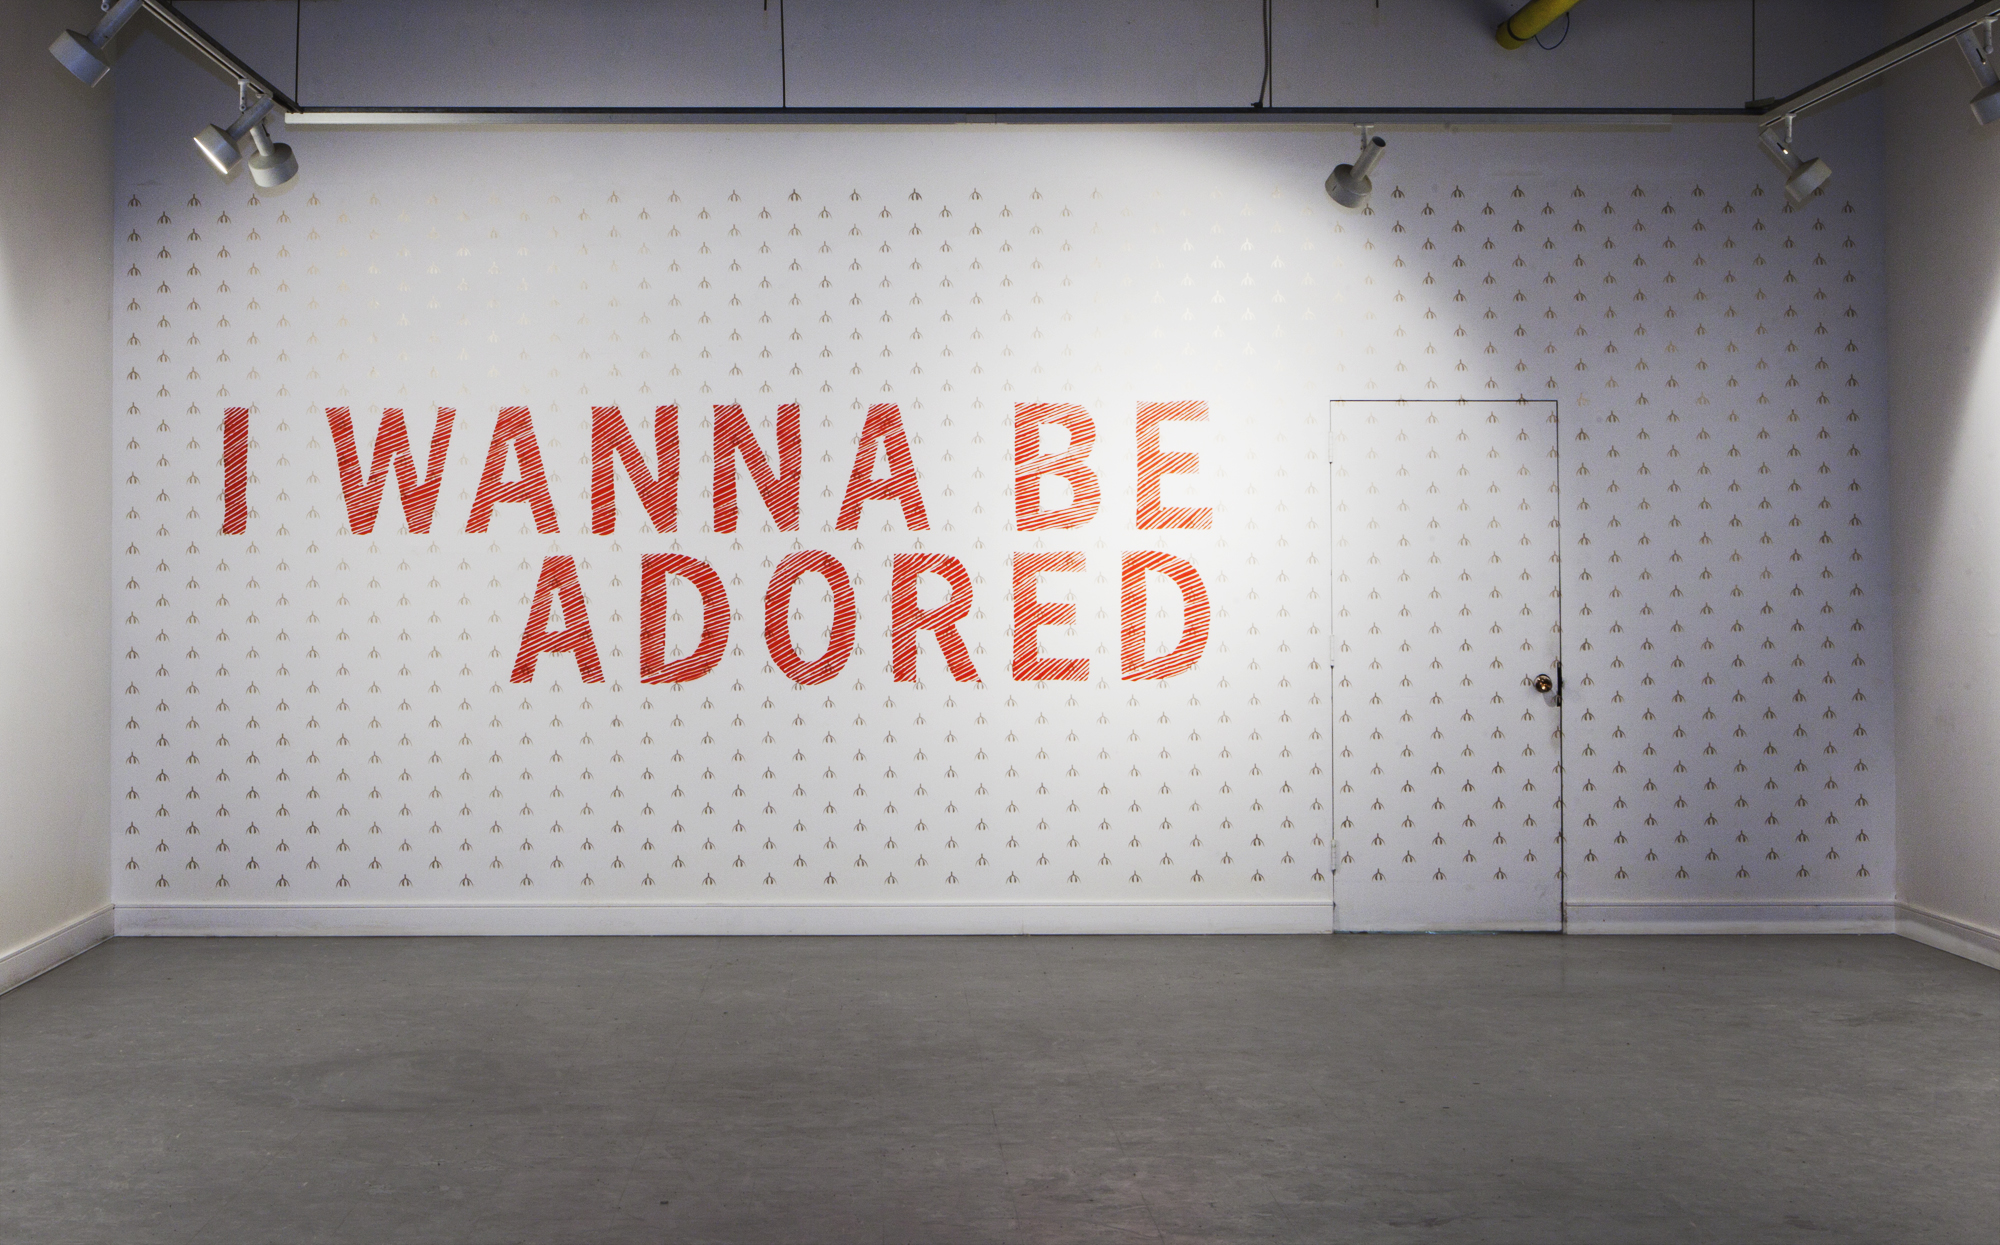  Site specific installation at  Definitely Superior Gallery   I WANNA BE ADORED, 2014  Gold, Red Acrylic 23 x 9 feet 